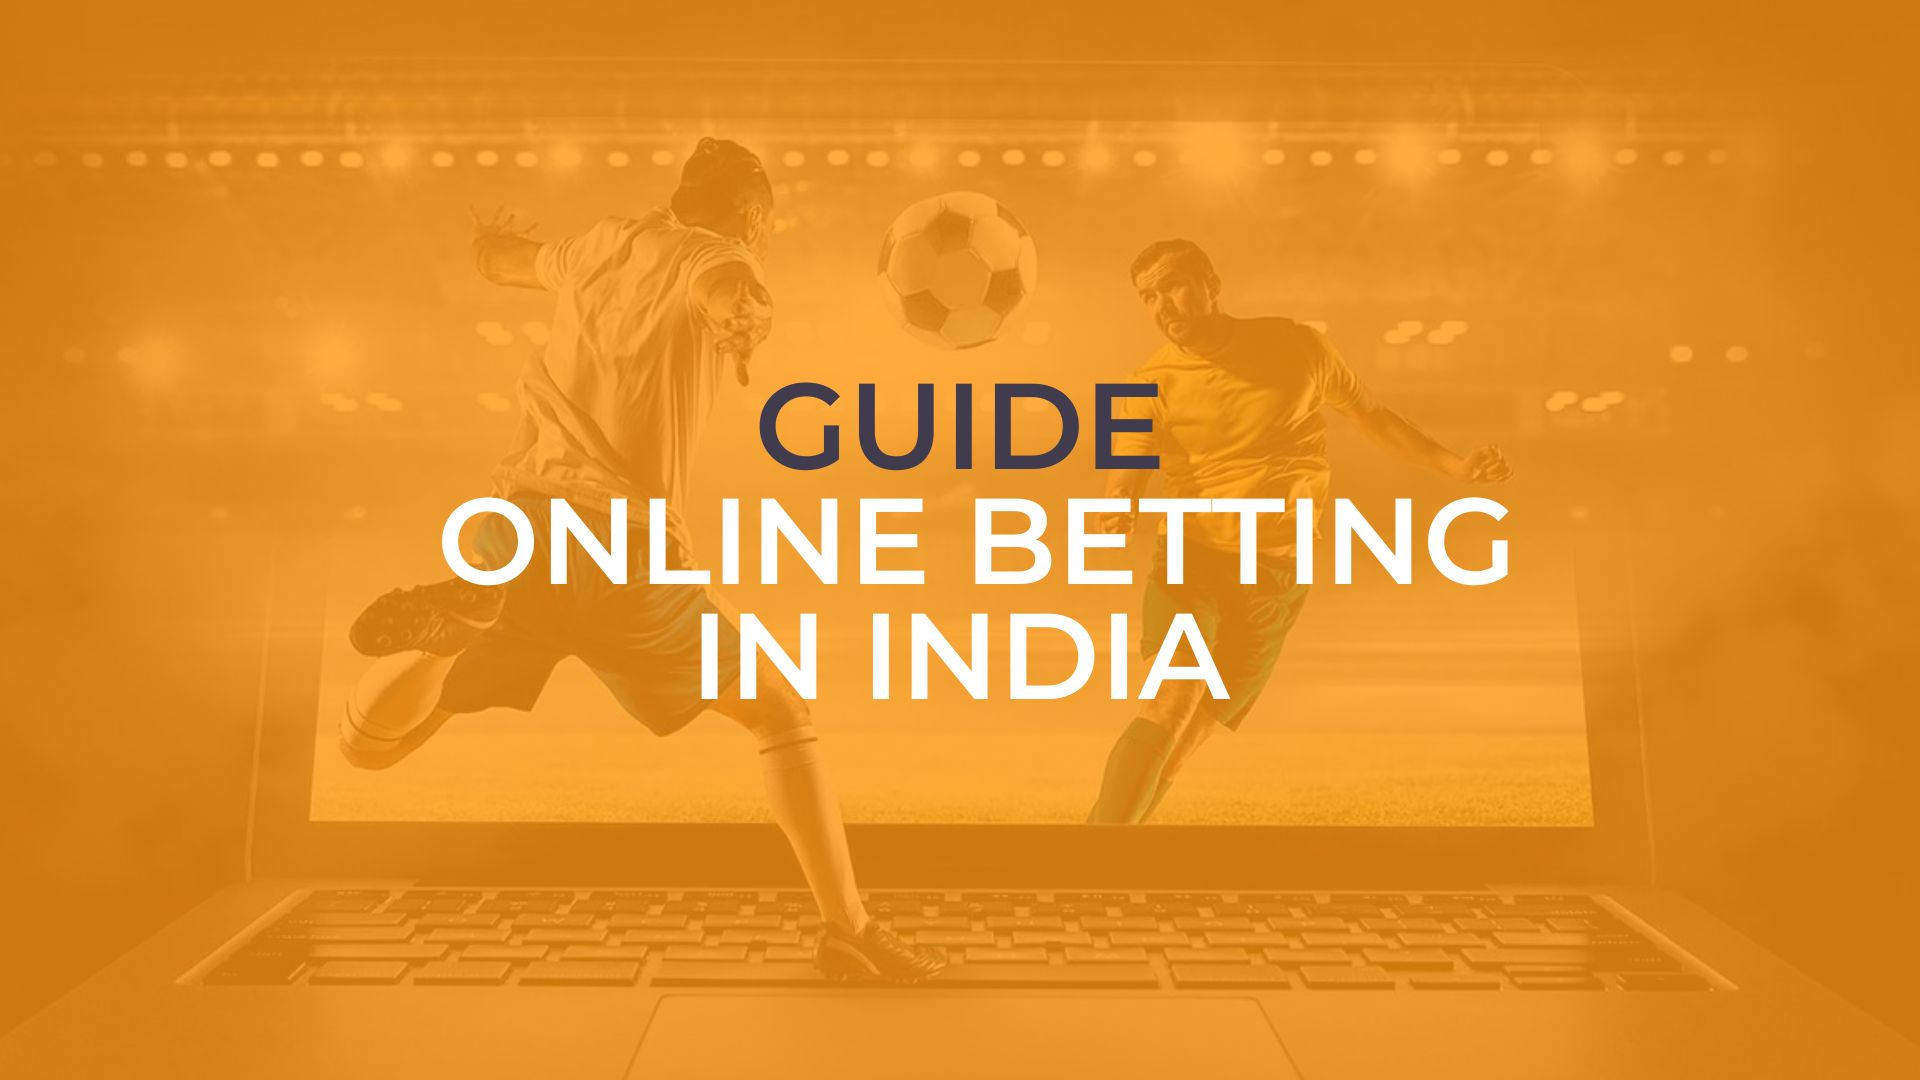 Welcome to Your Guide on Online Betting in India